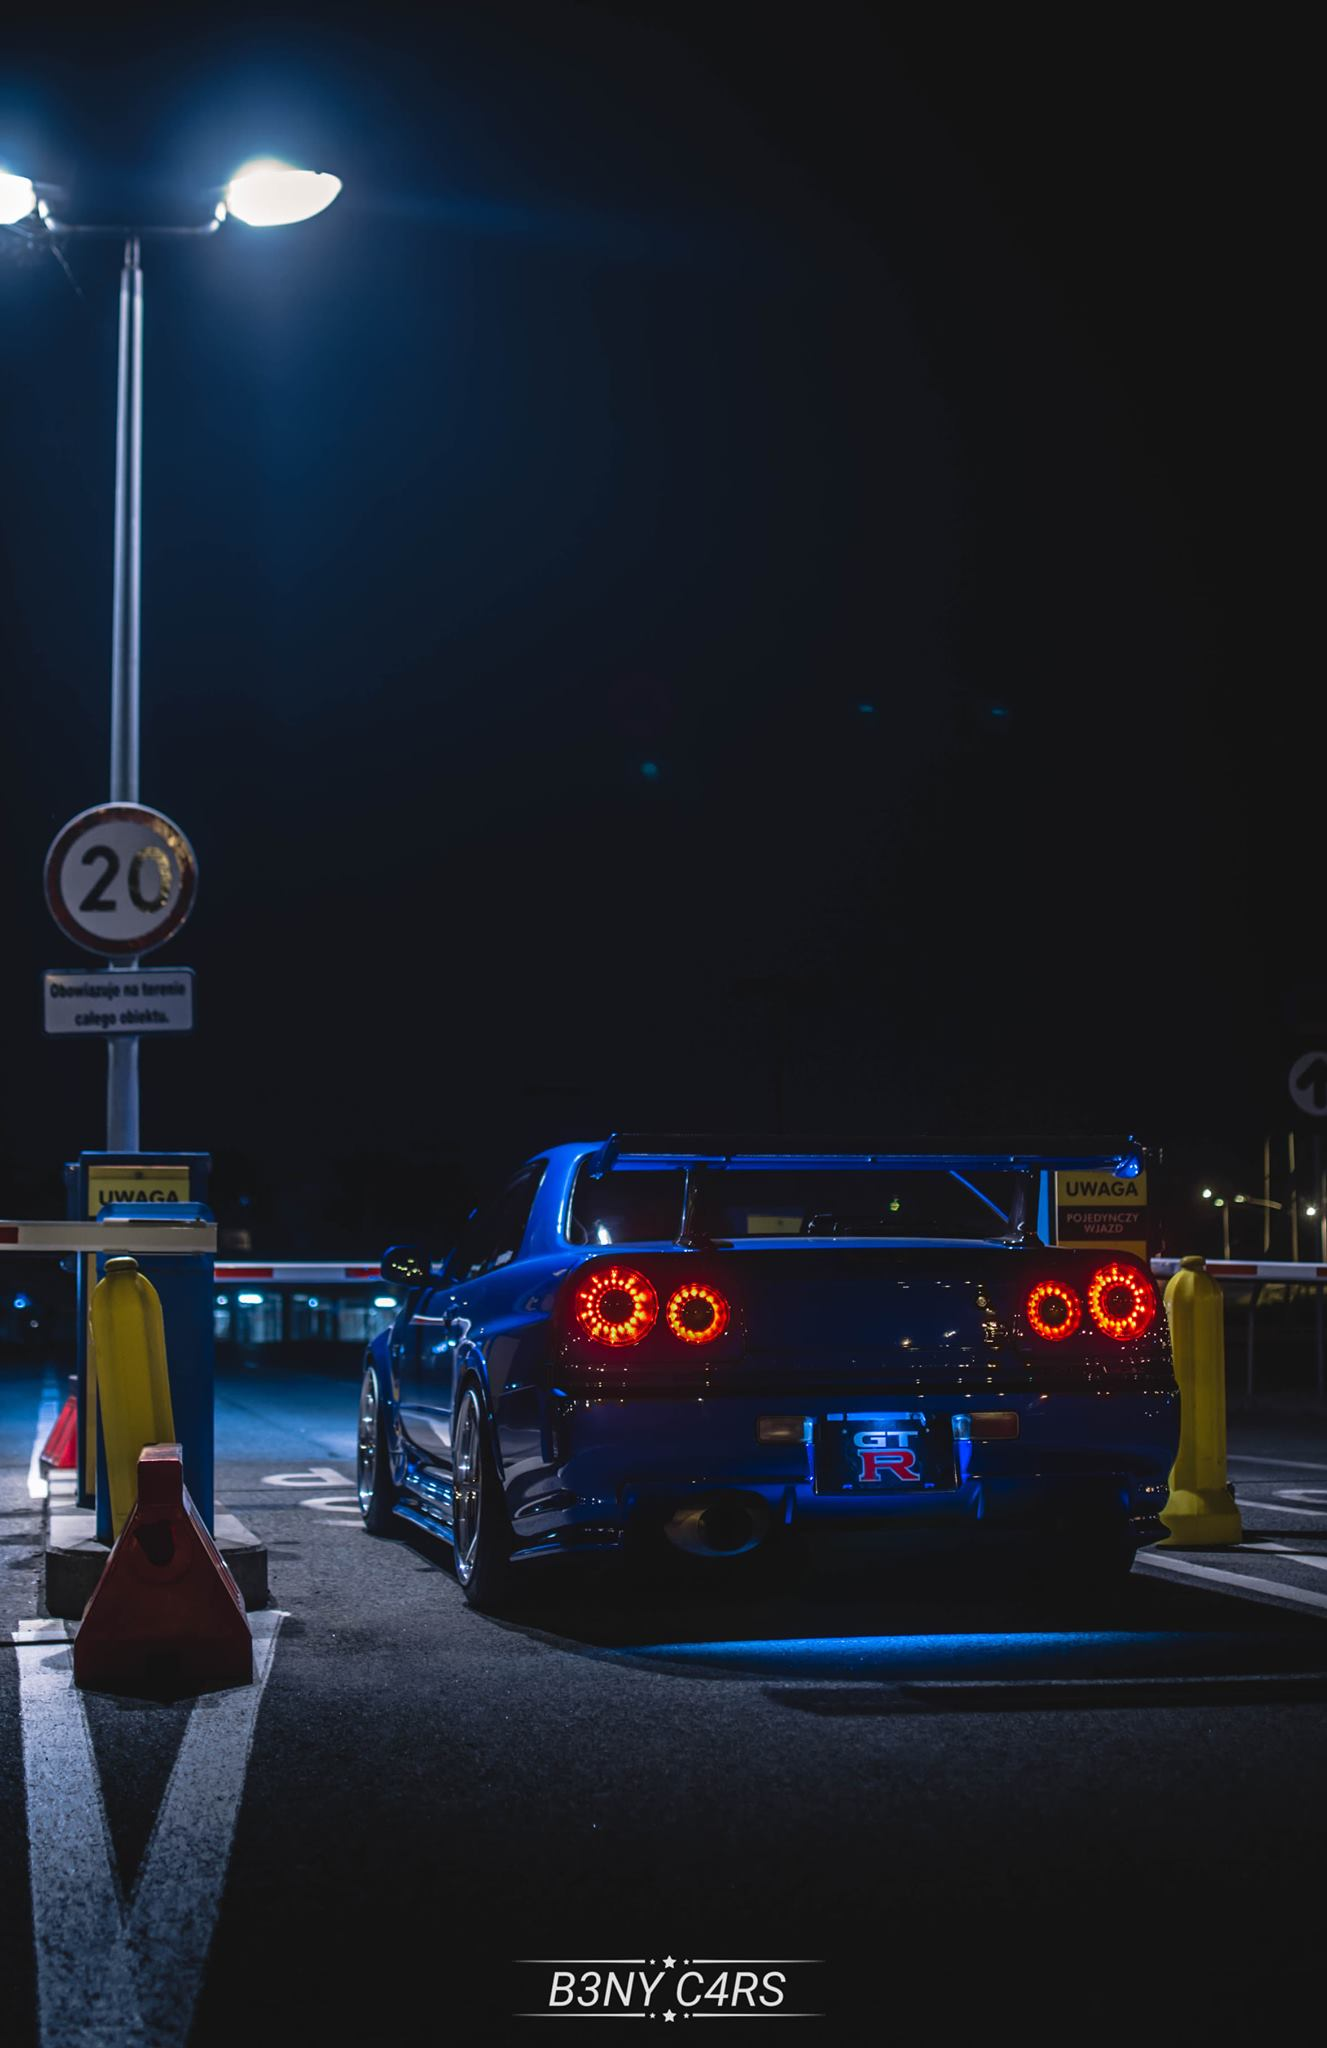 Top gtr r34 iphone wallpaper HQ Download Book Source for free download HD, 4K & high quality wallpaper